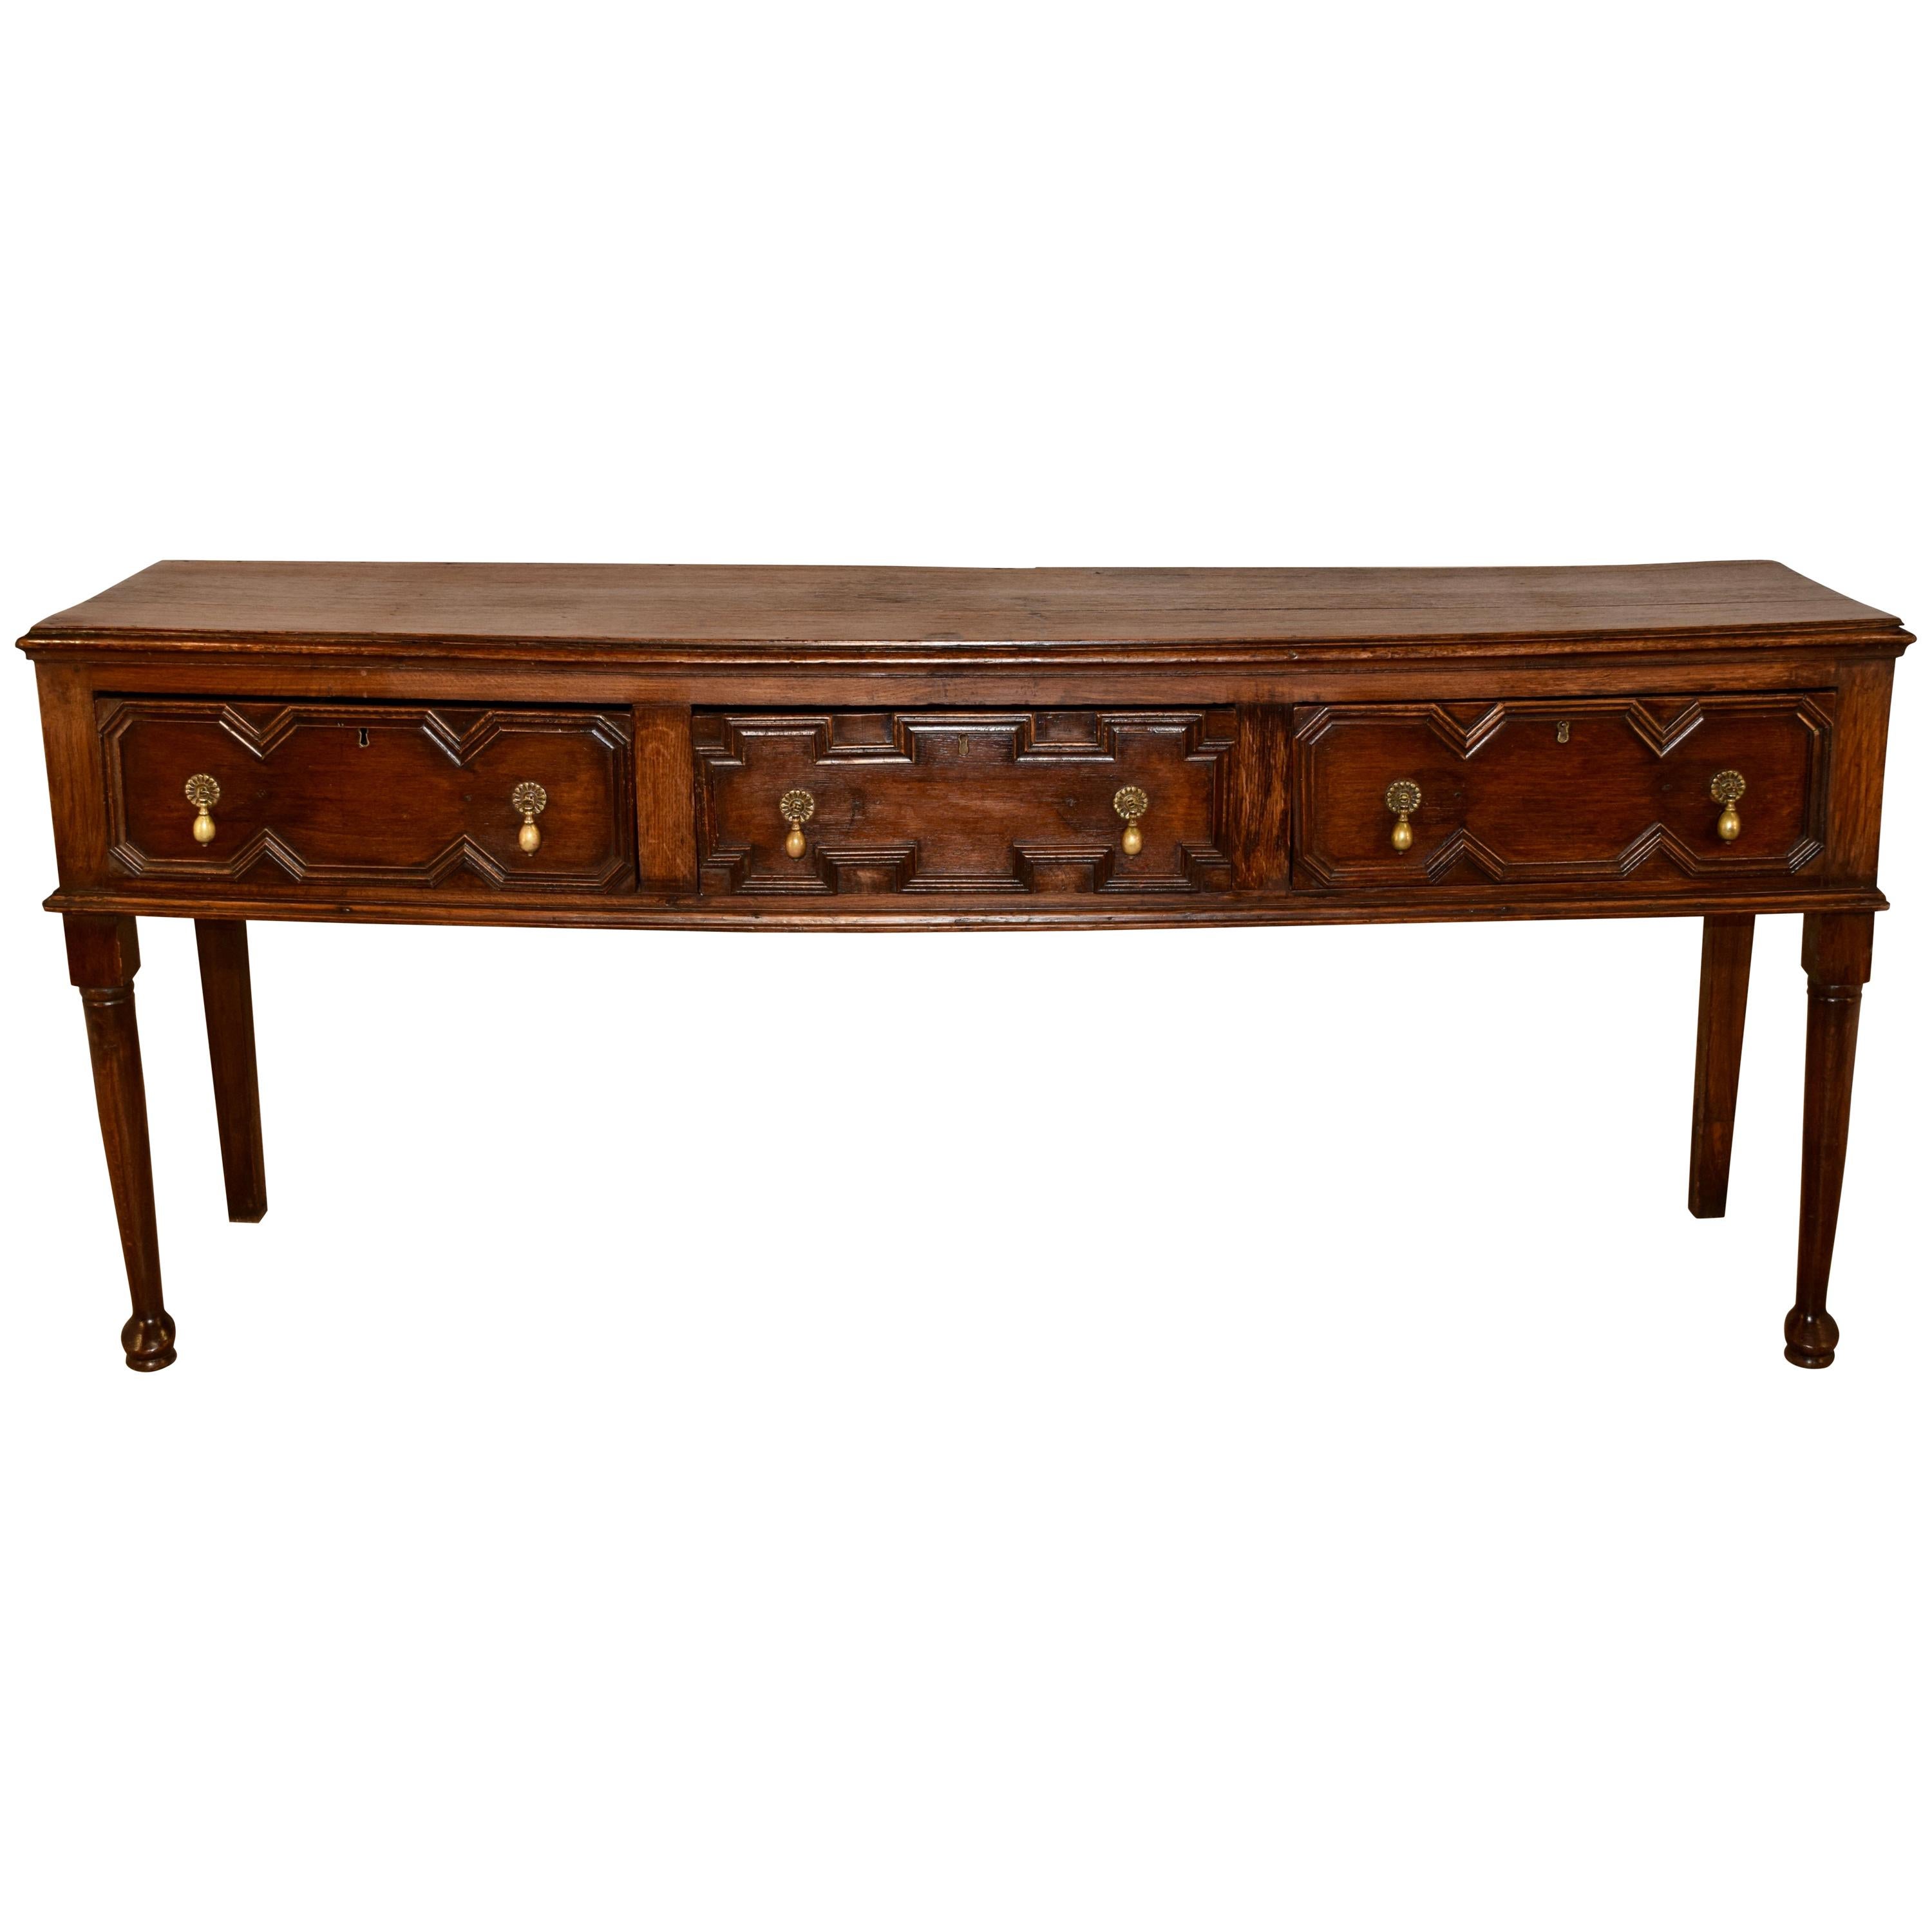 Period William and Mary Sideboard